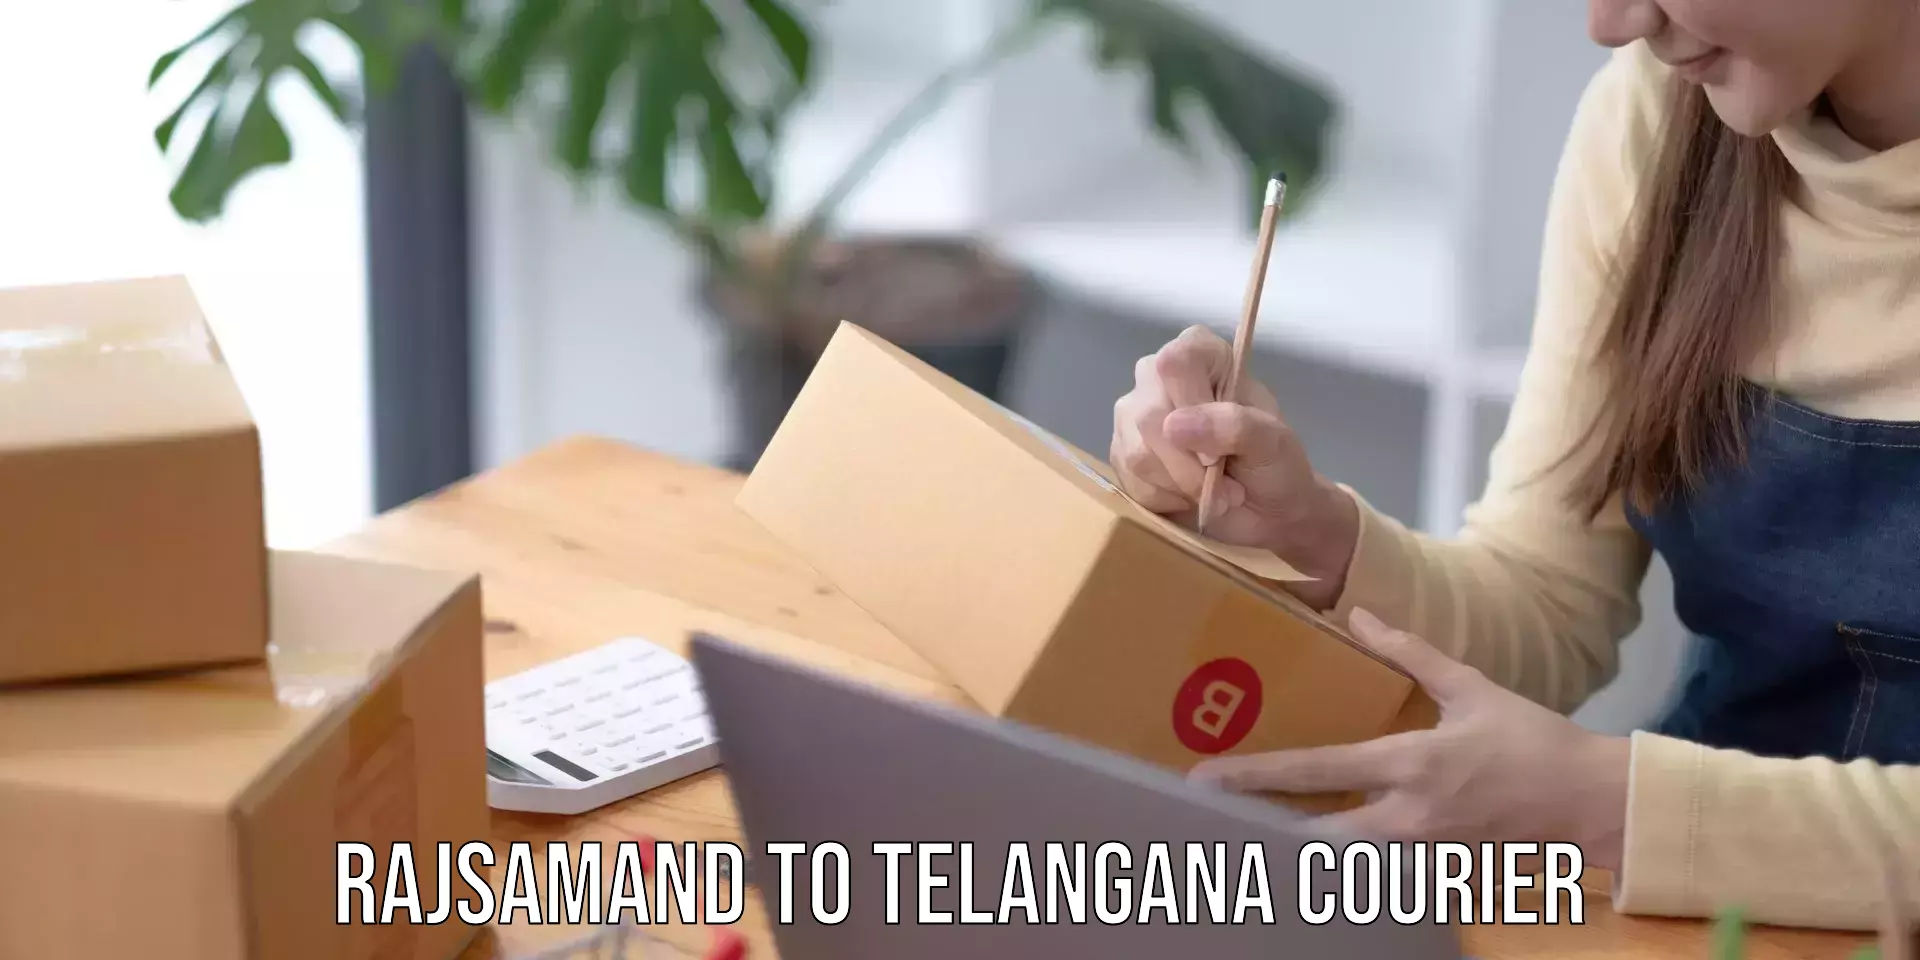 State-of-the-art courier technology Rajsamand to Gangadhara